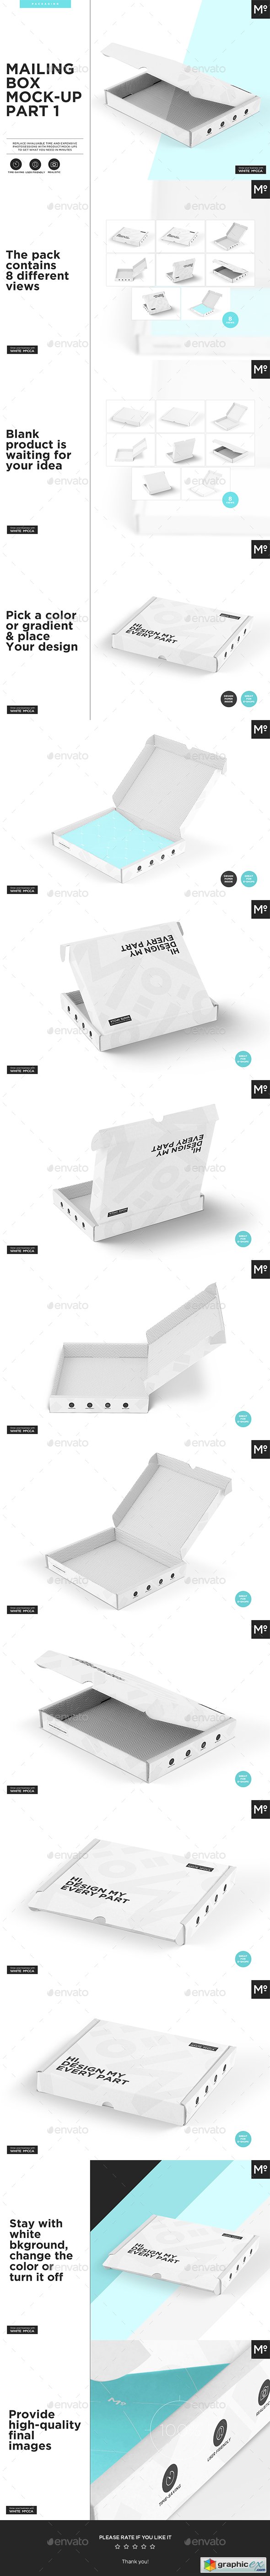 Mailing Boxes Mock-up Part 1